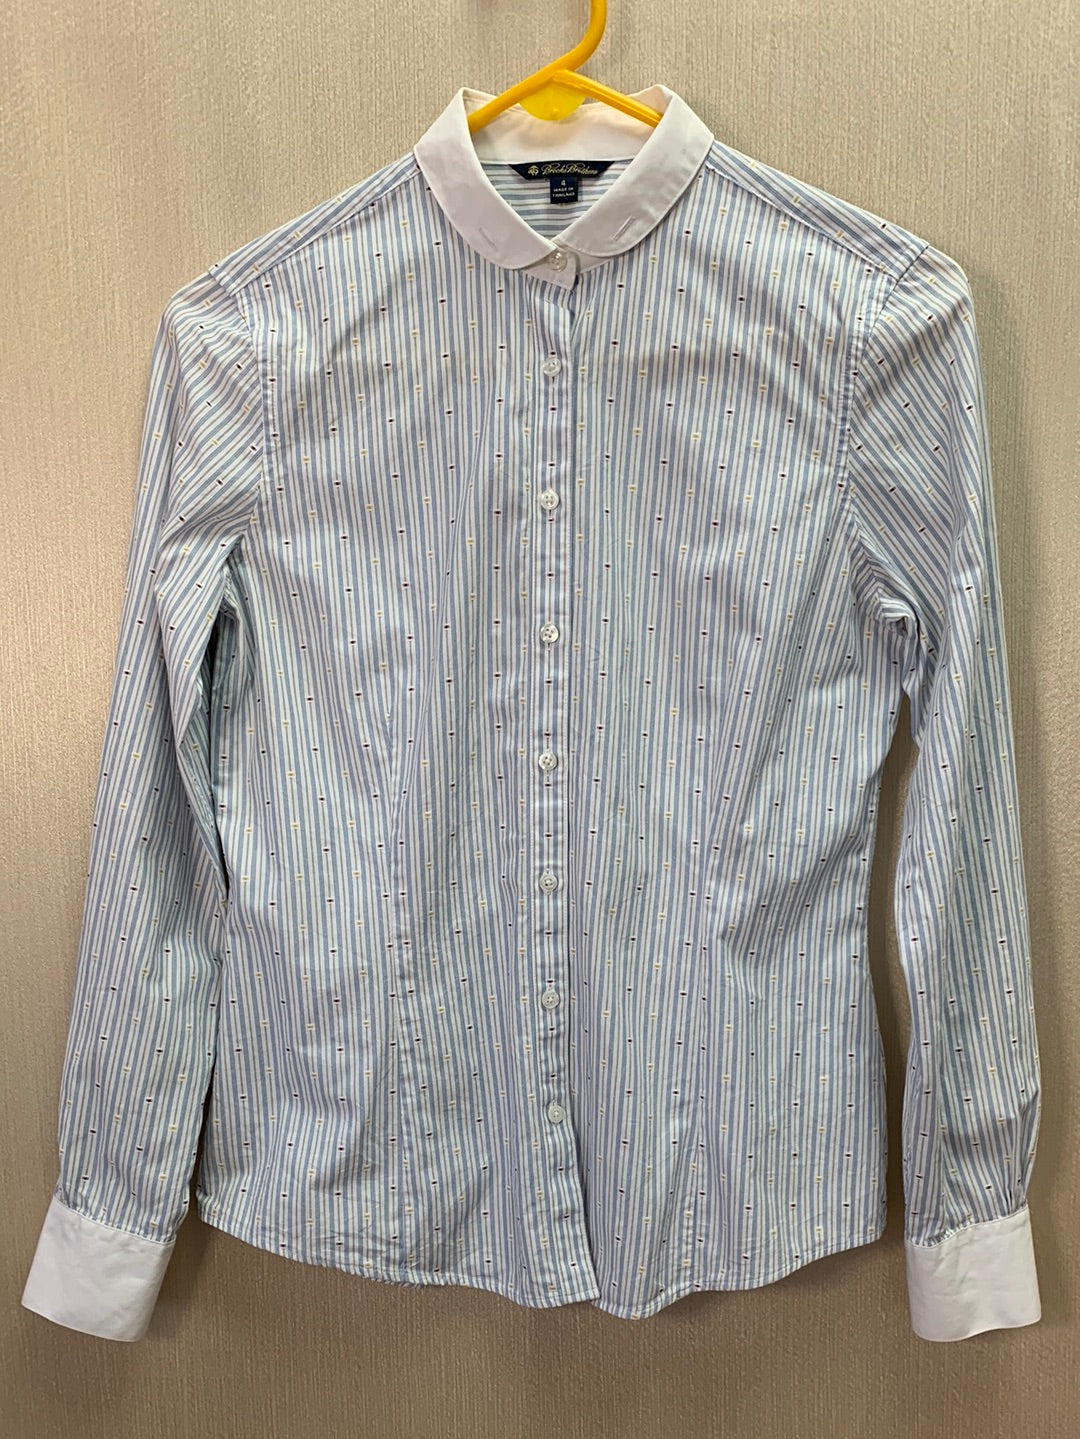 BROOKS BROTHERS blue stripe Button Up Long Sleeve Shirt - 4